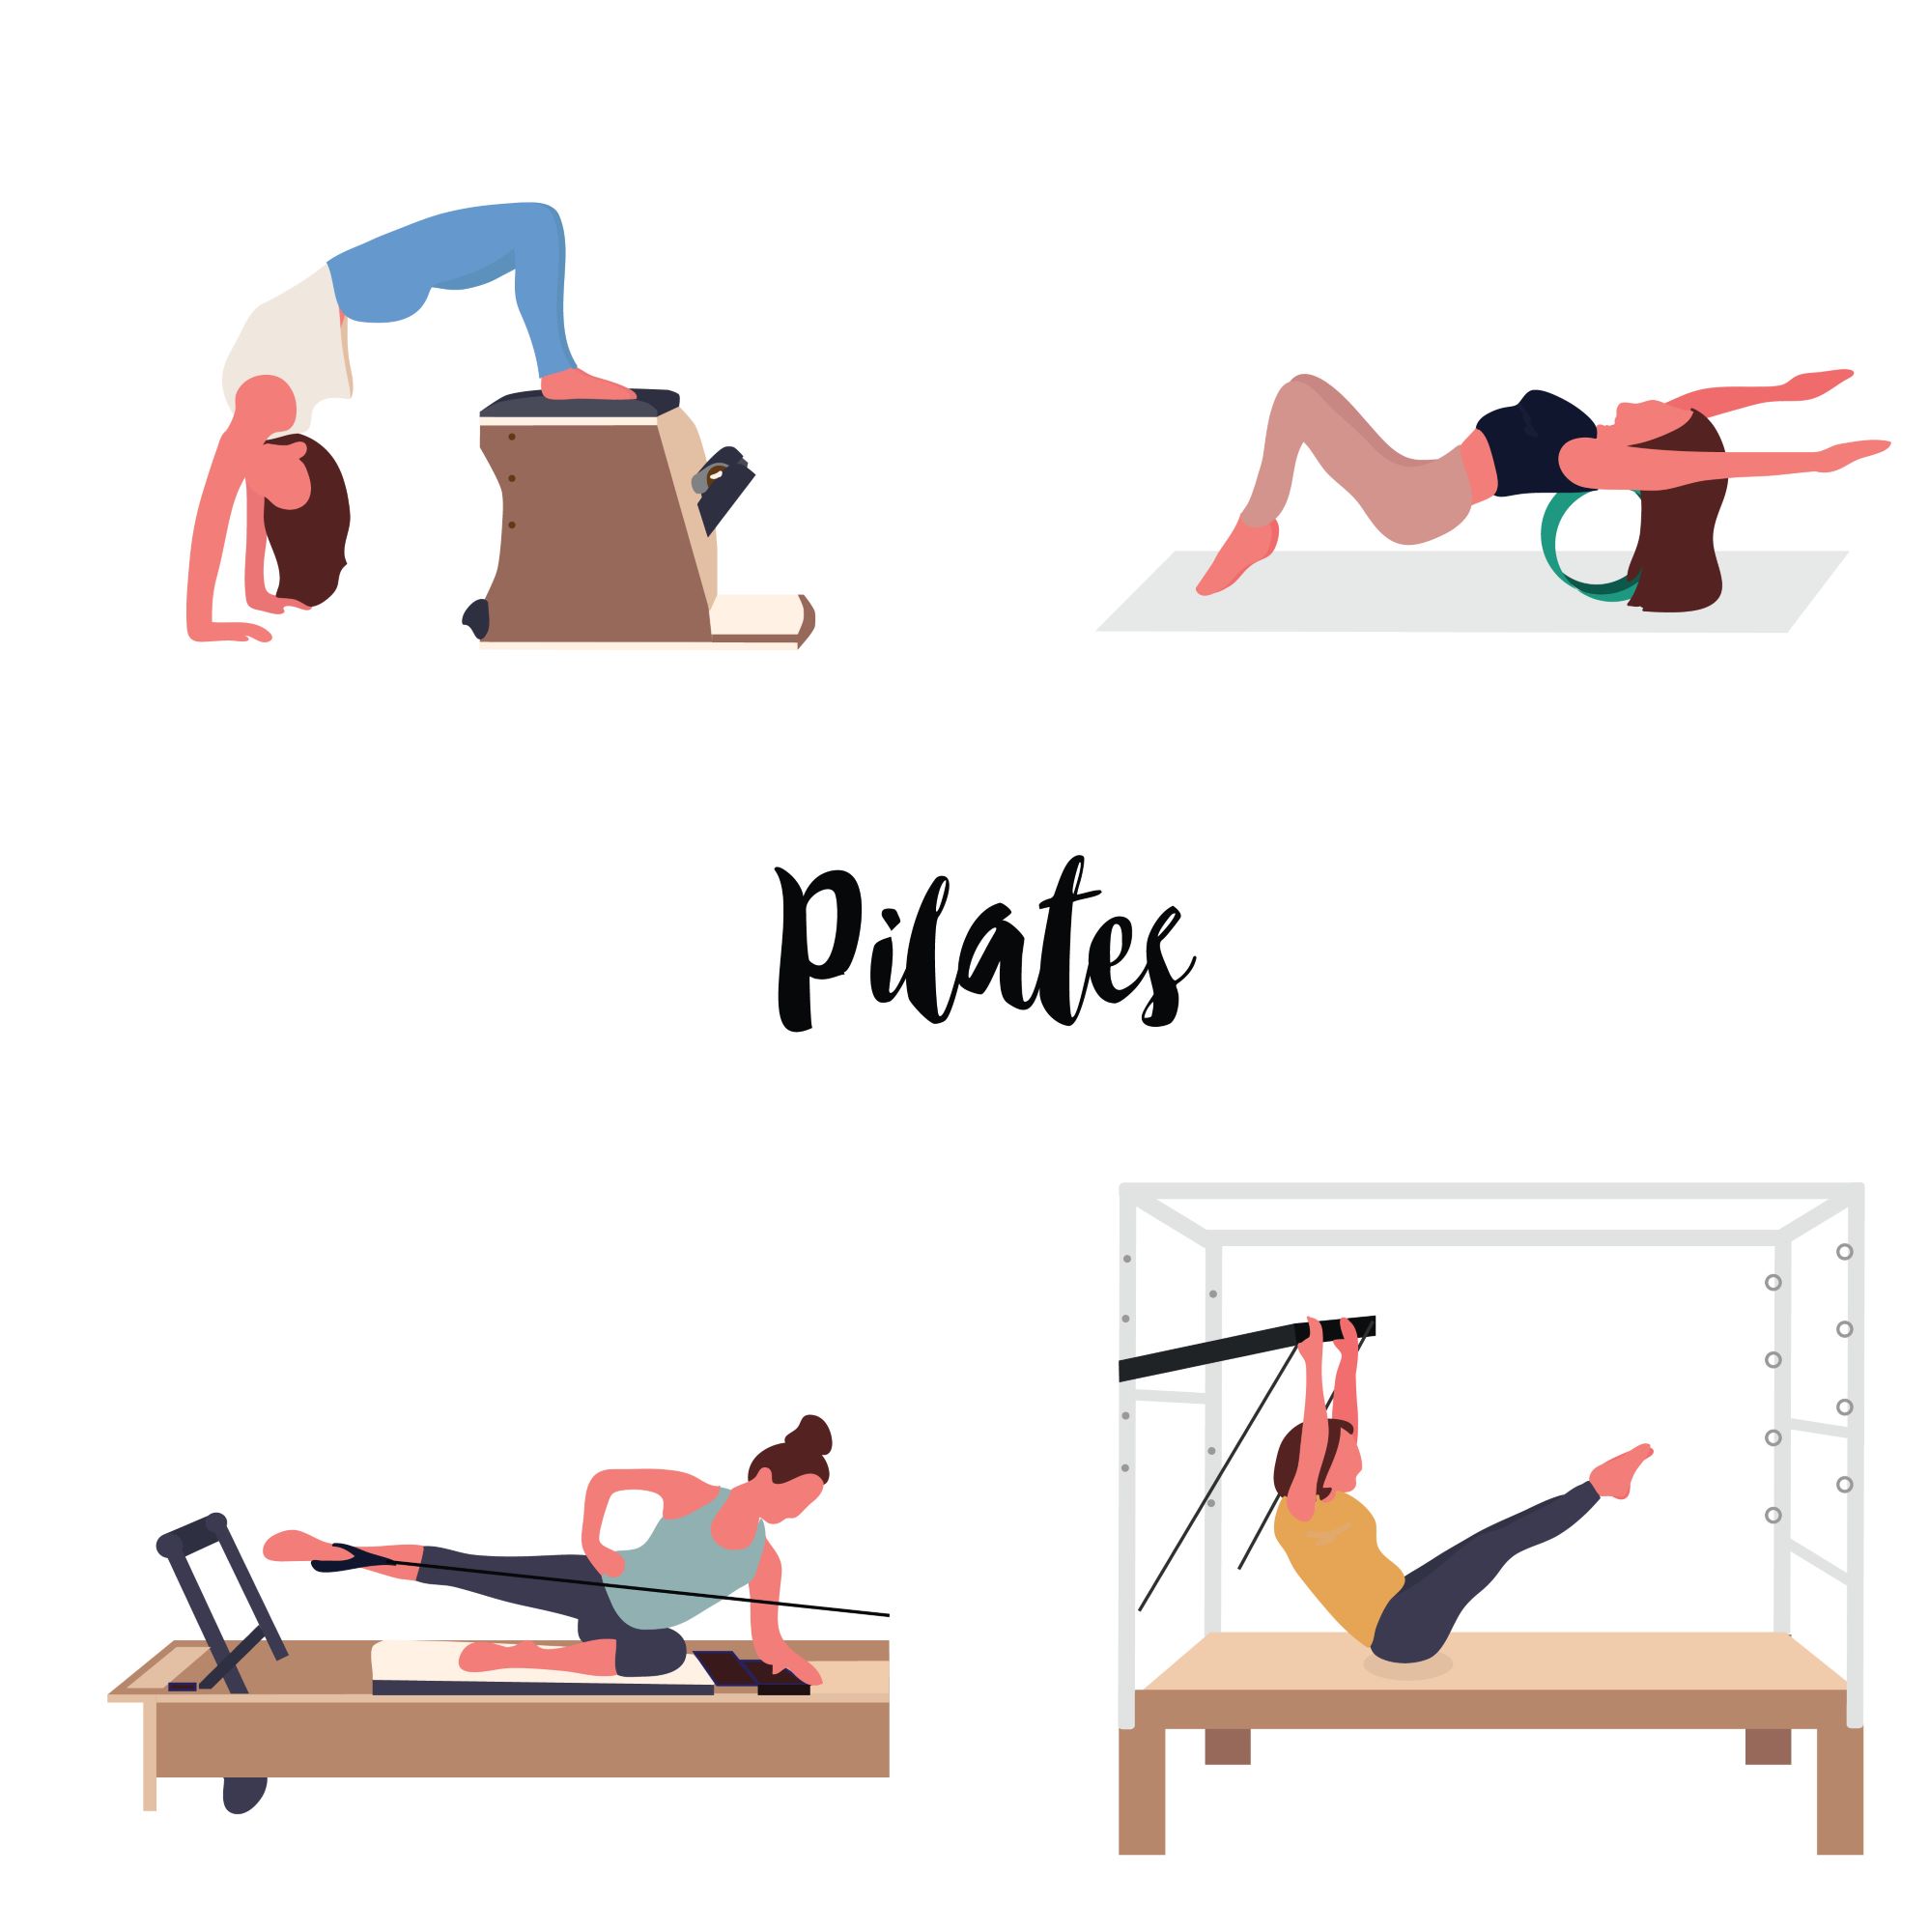 The best pilates apps, rated and ranked - The Manual